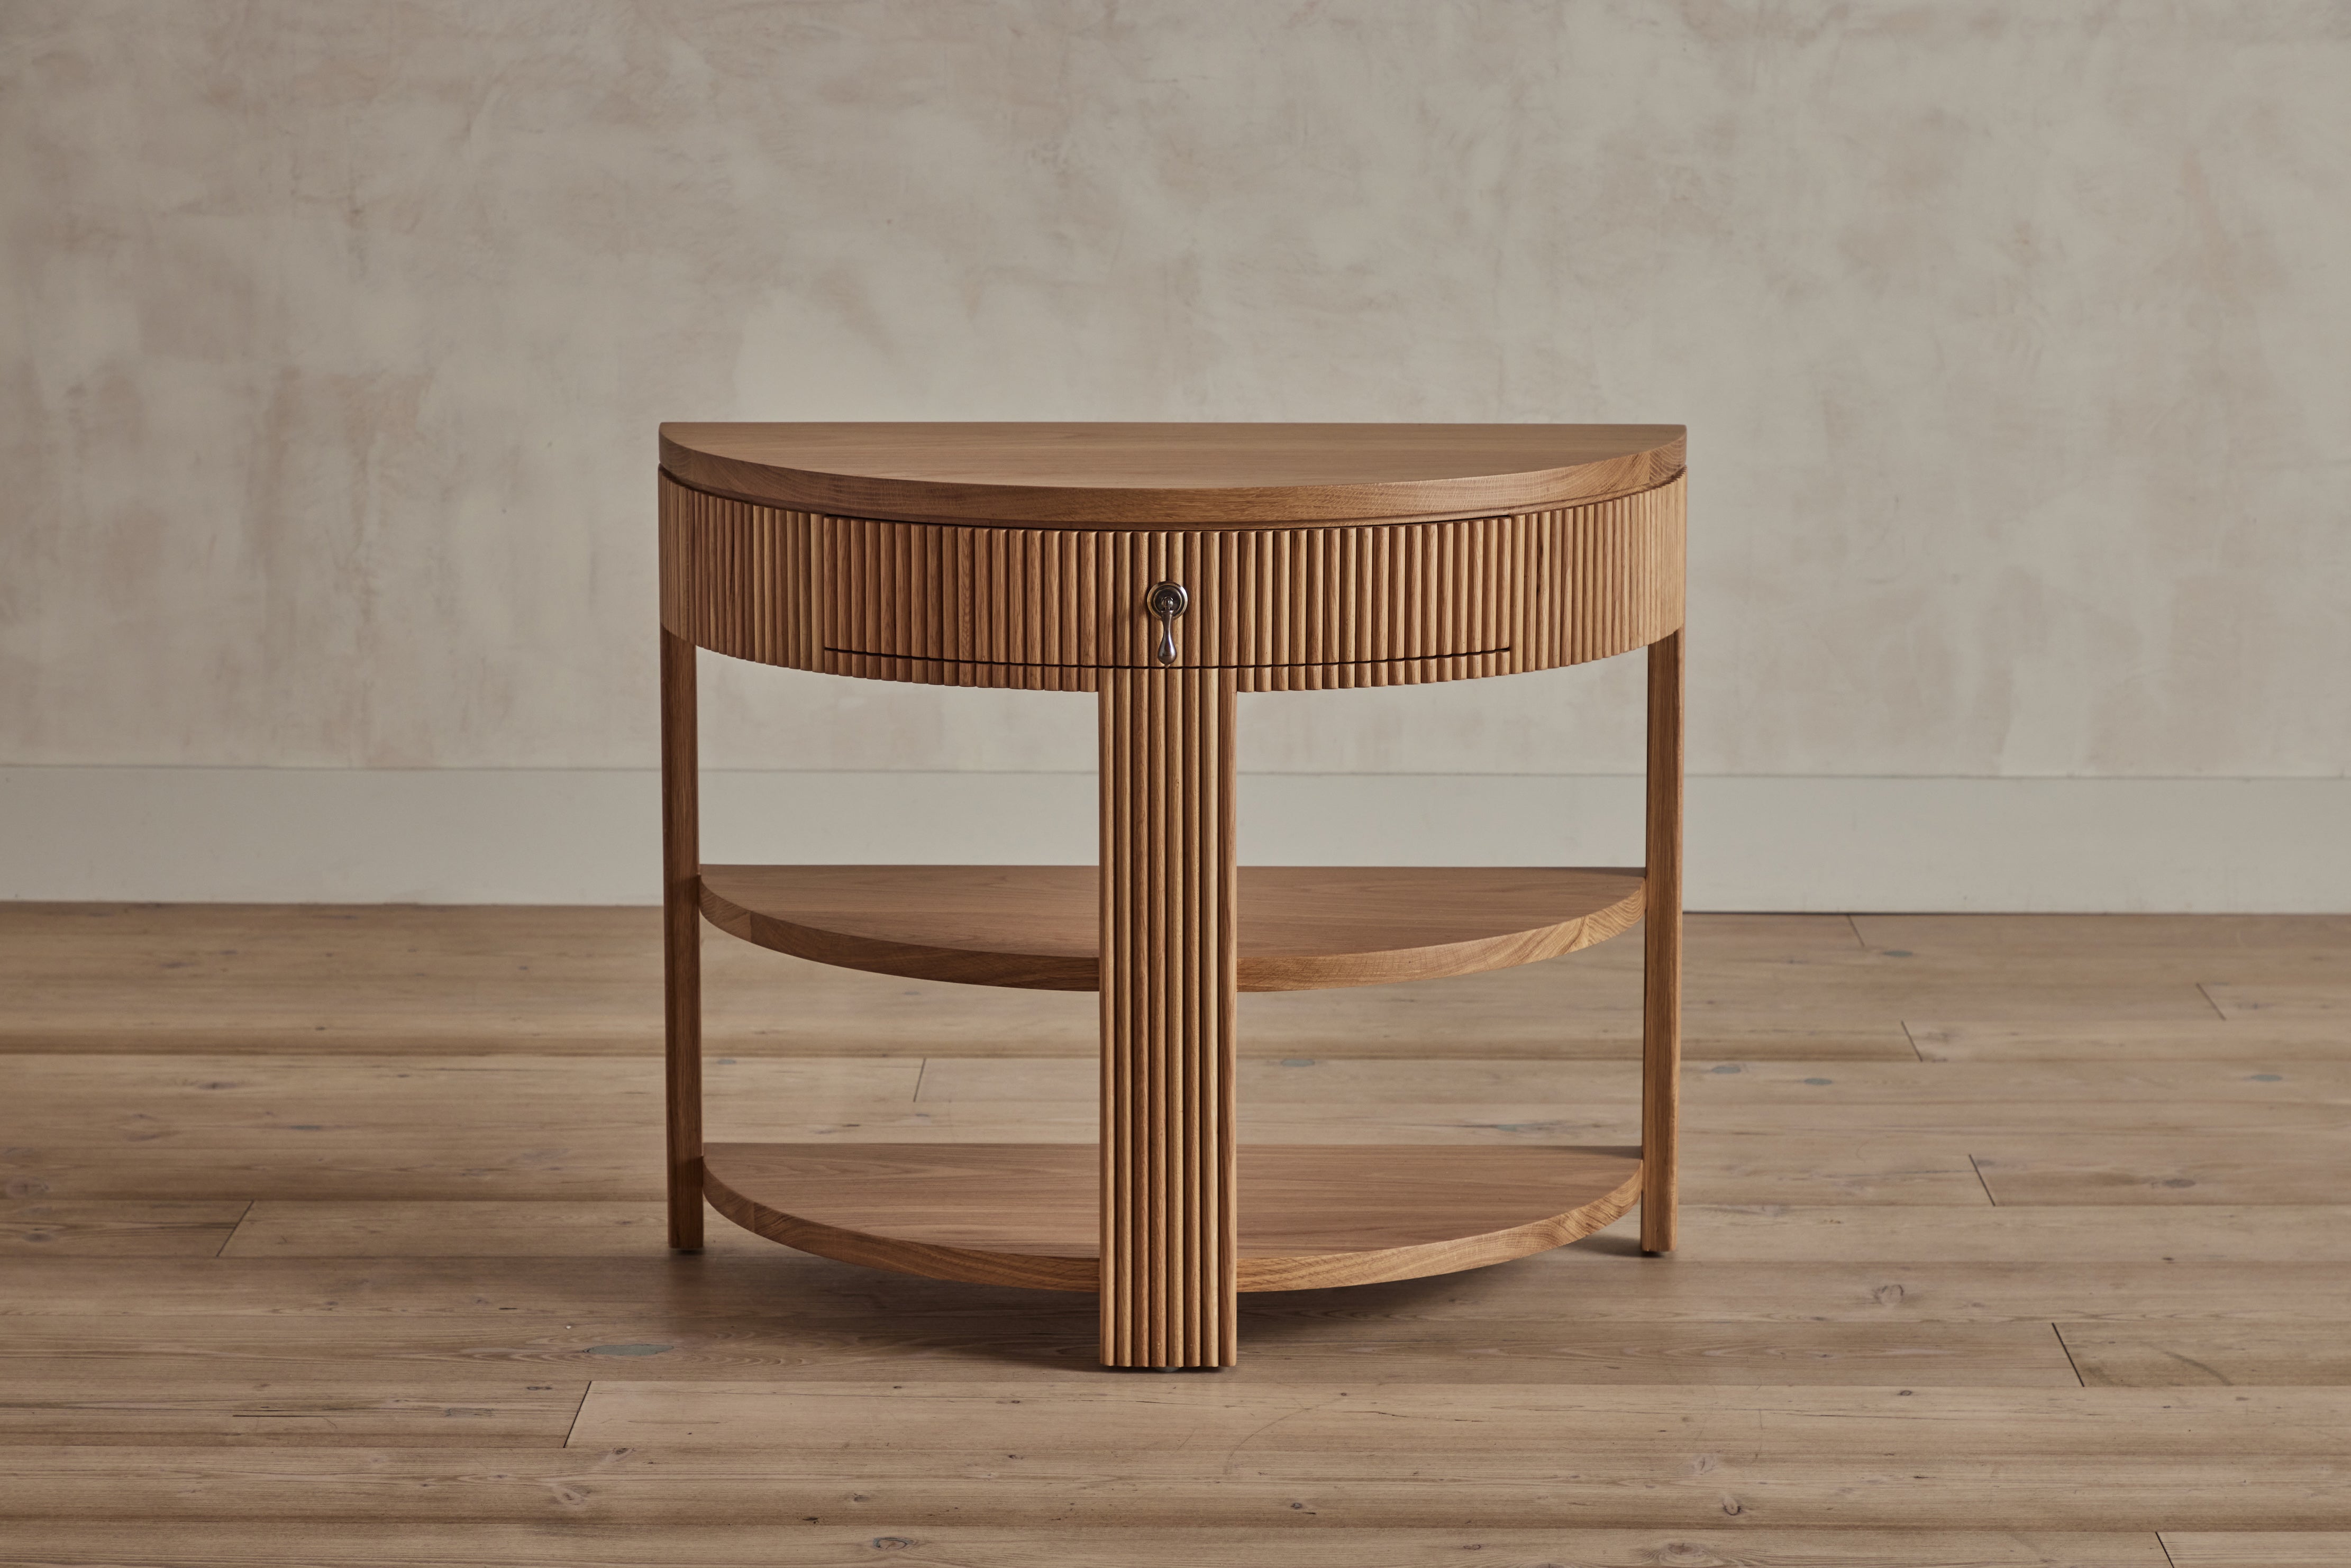 Shown in Natural Oak with Wood Top|AS SHOWN $4,400